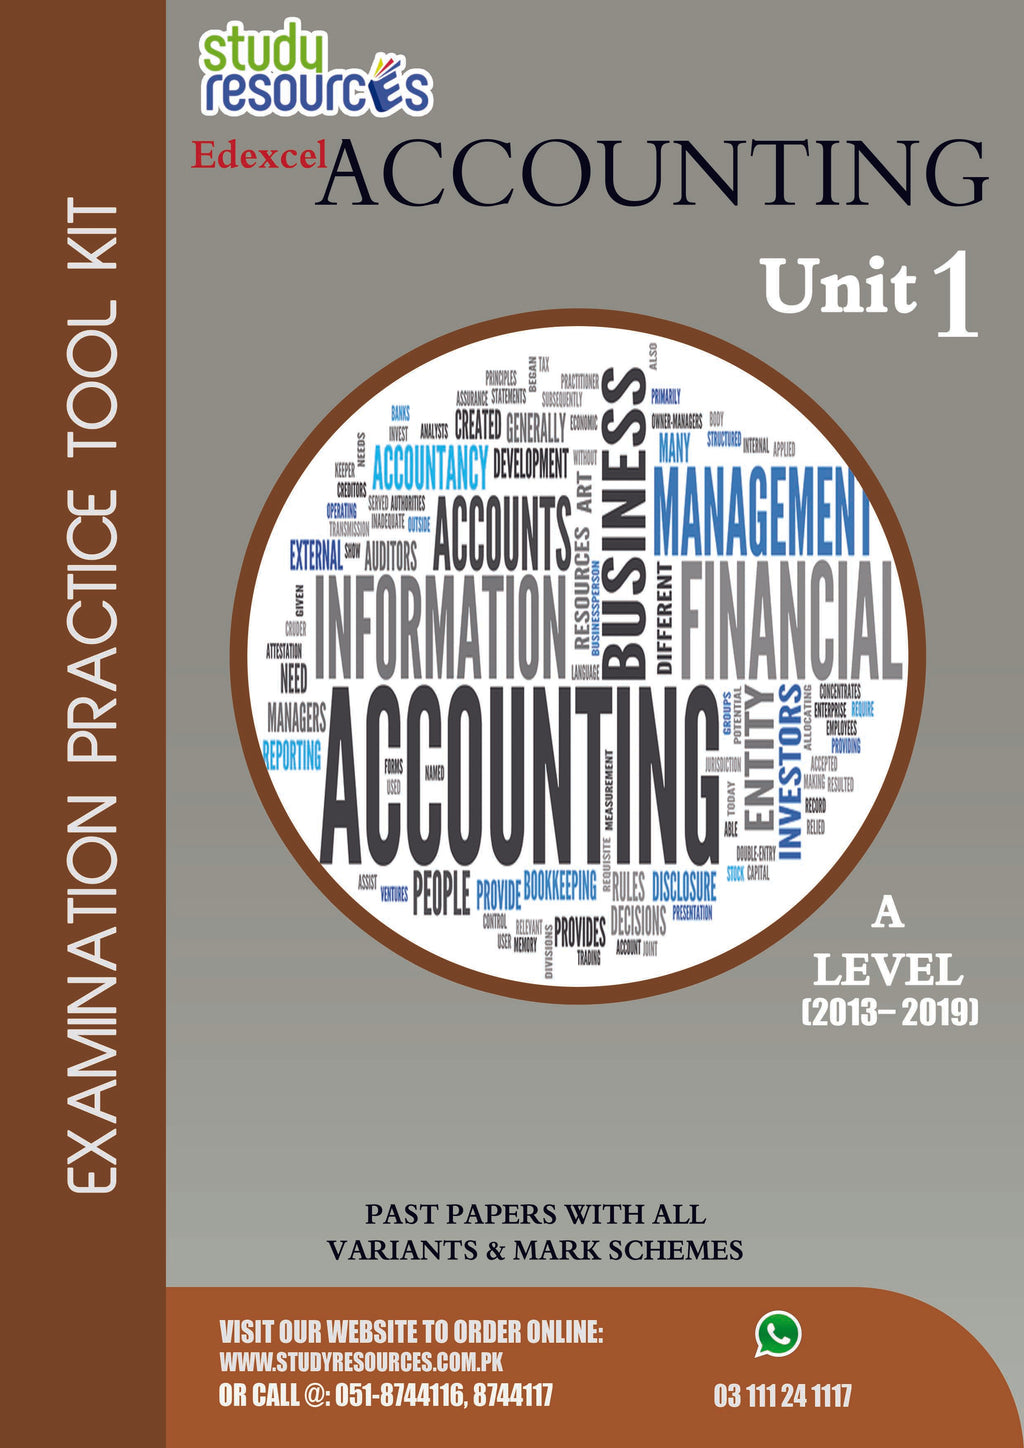 Edexcel A-Level Accounting Unit-1 Past Papers (2013-2019)